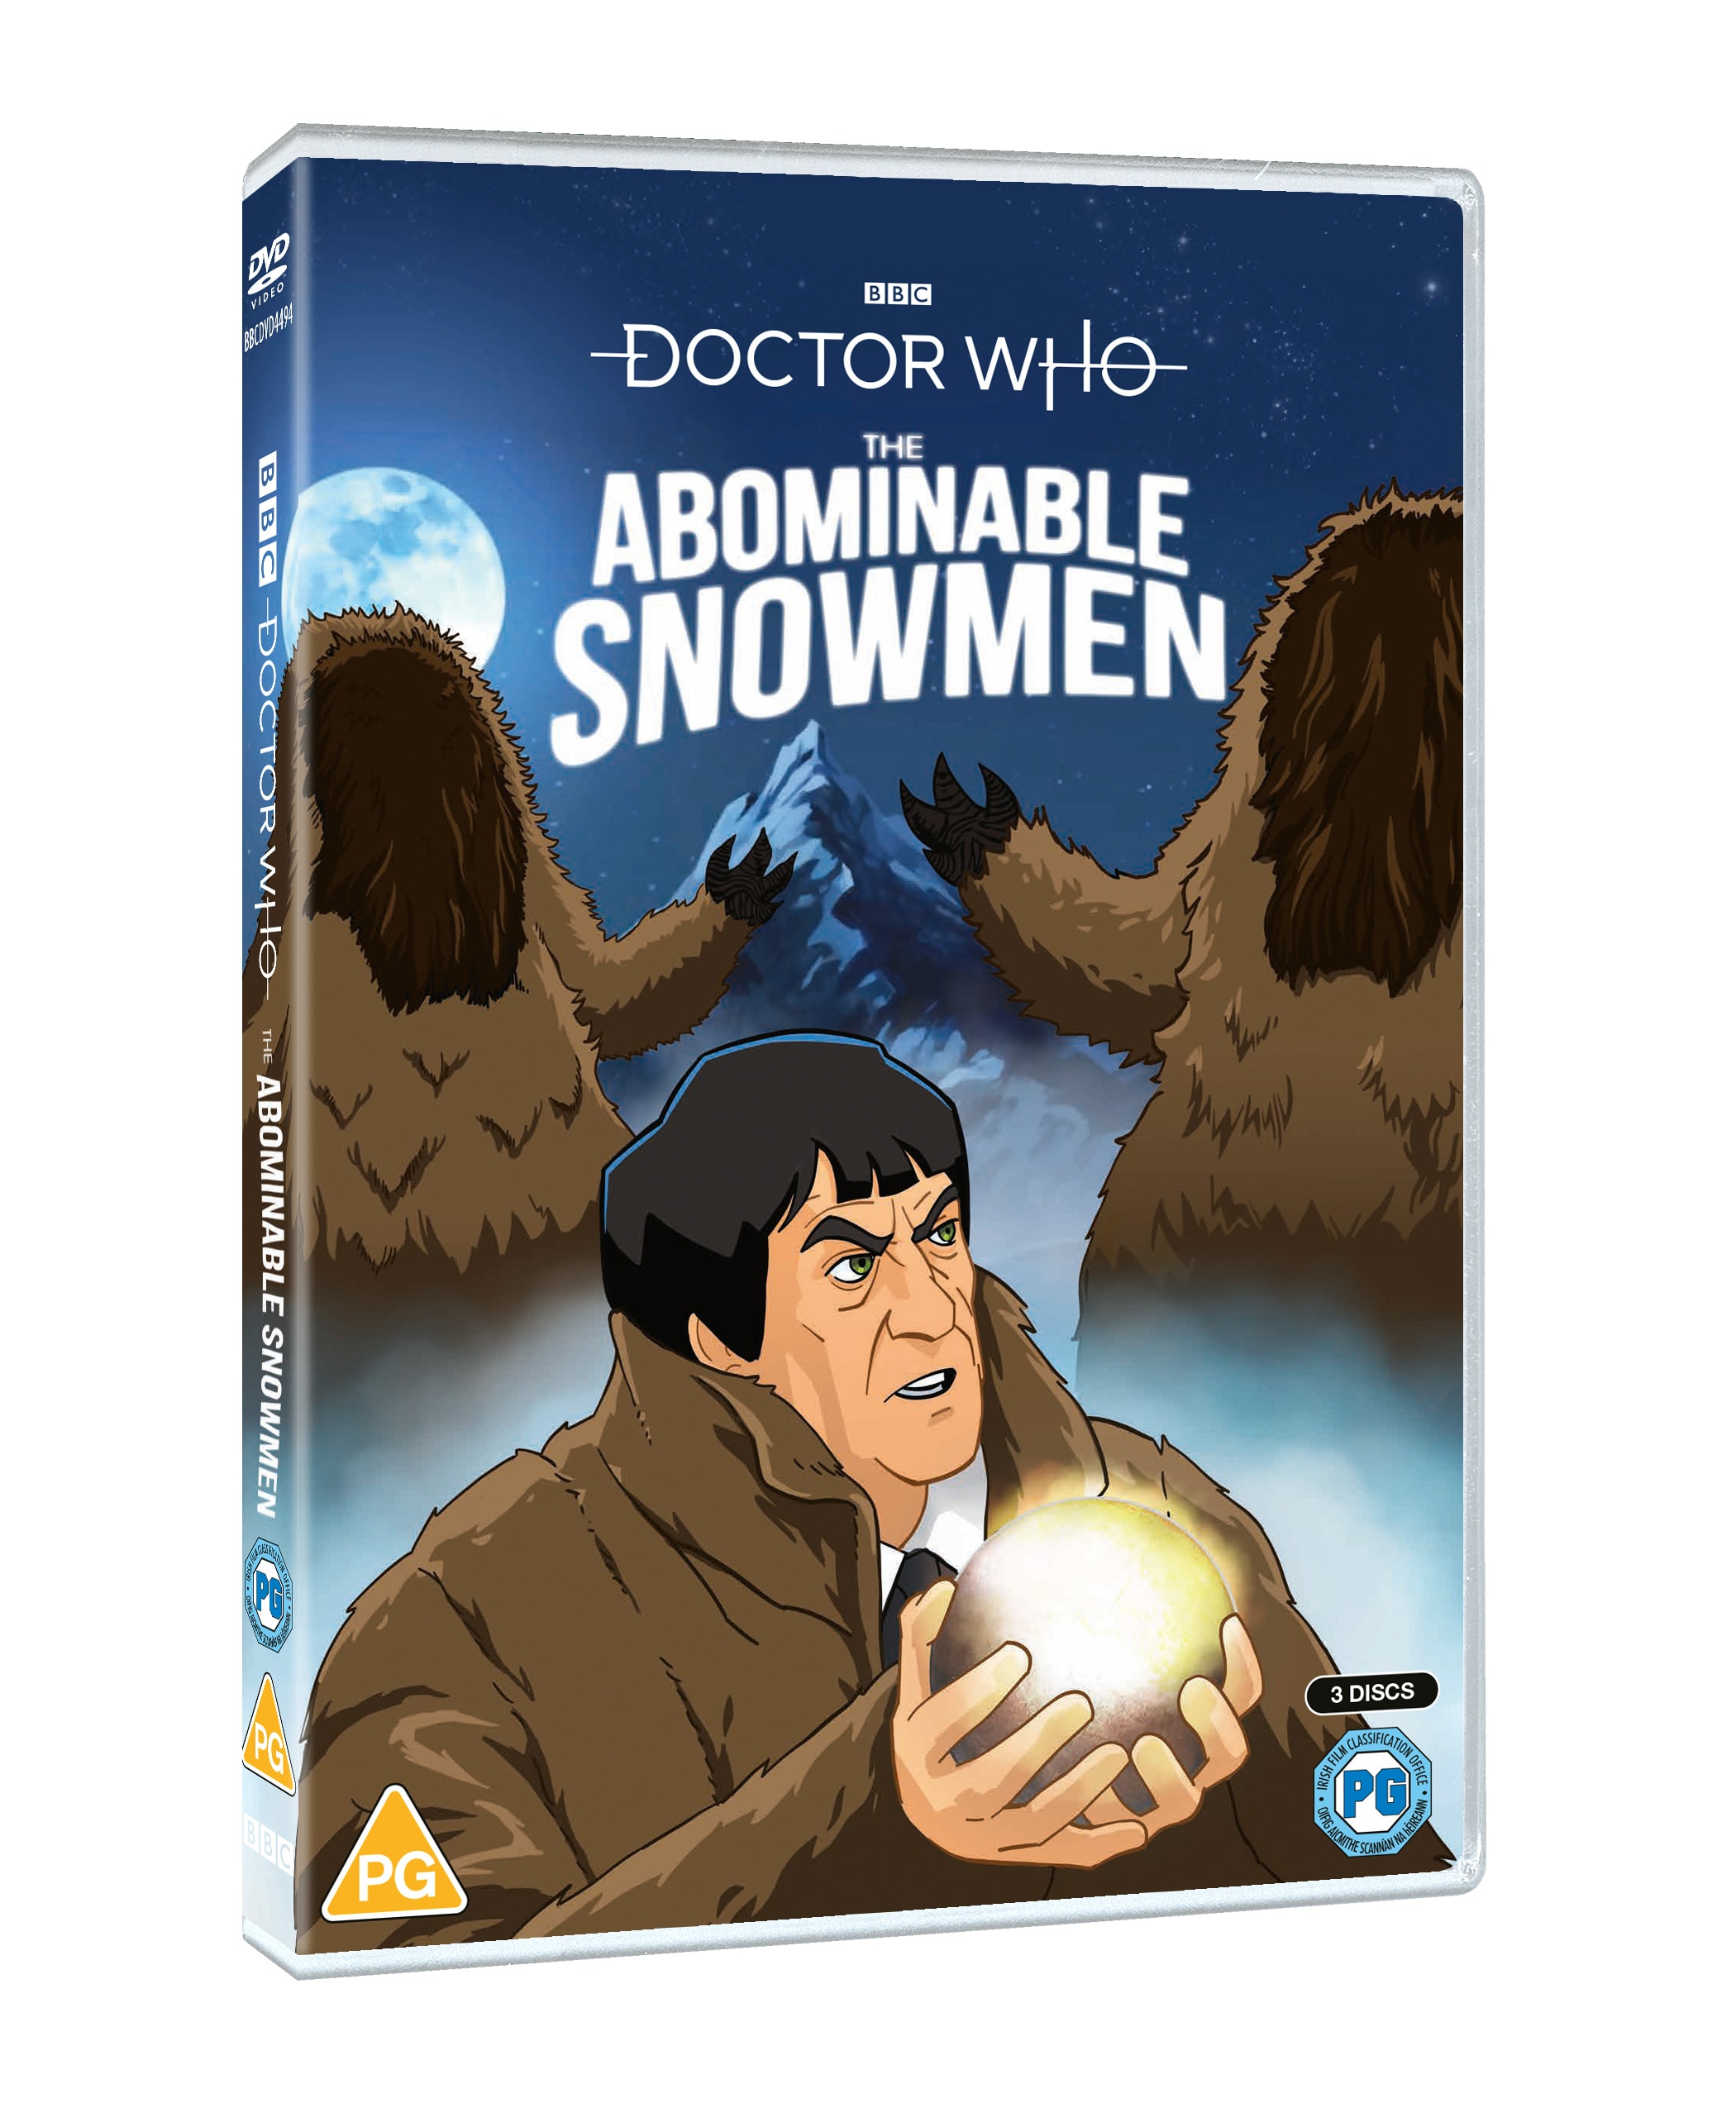 DVD cover of 'The Abominable Snowmen'